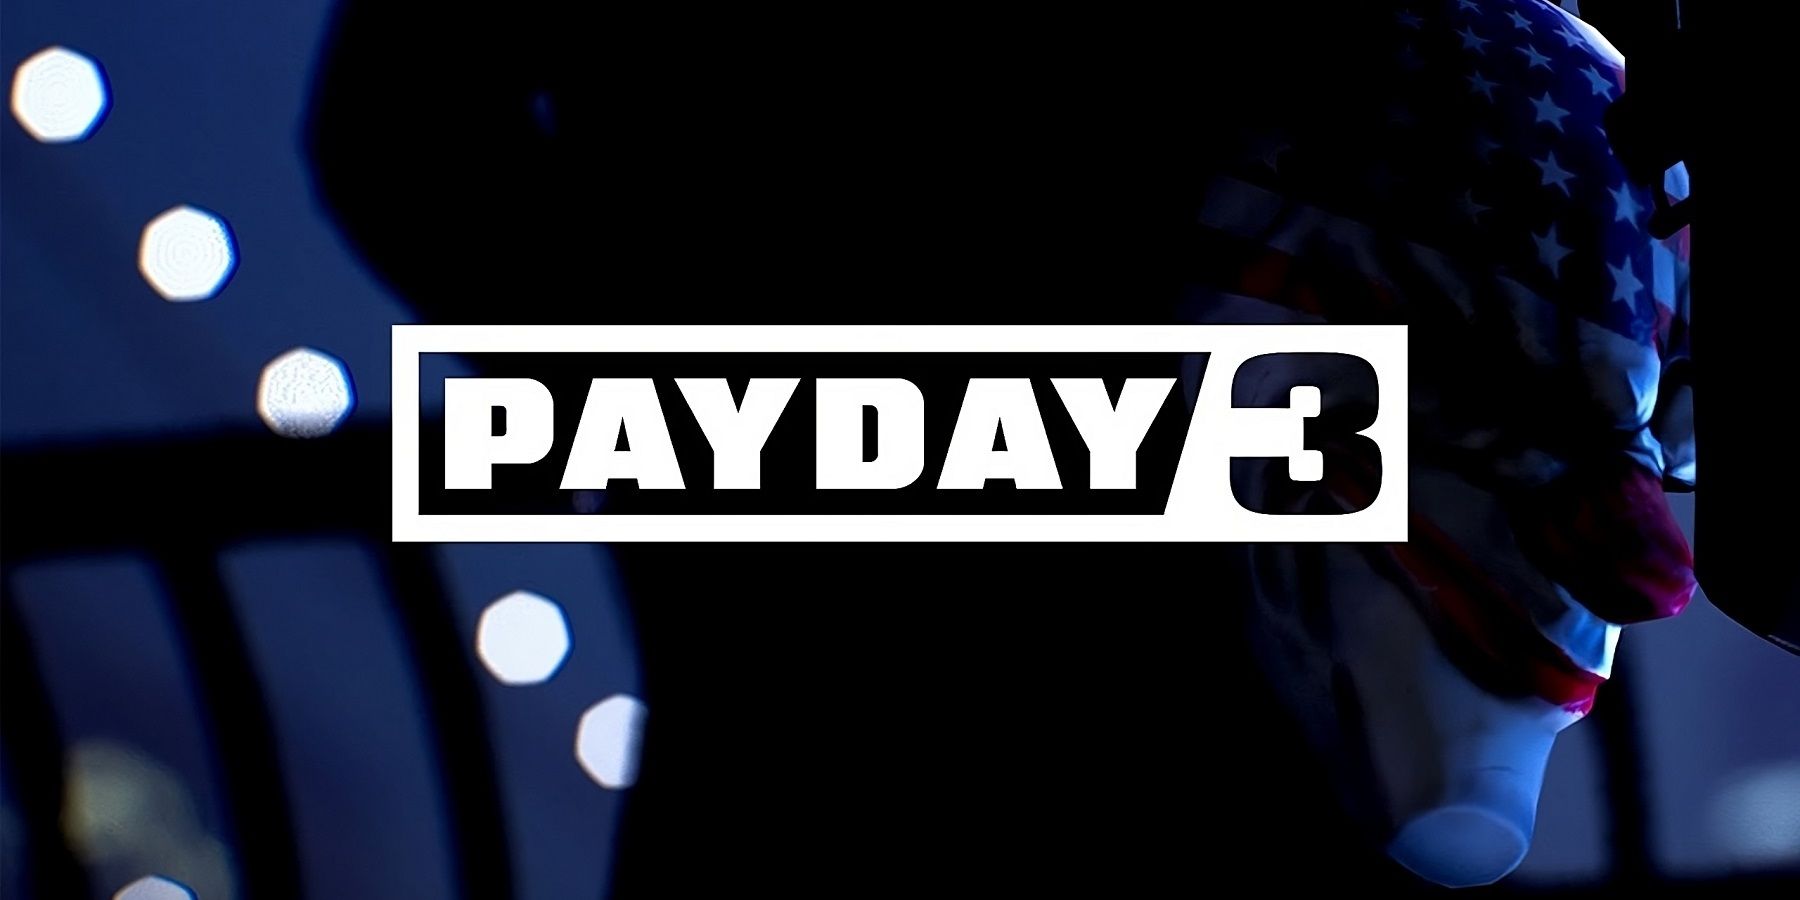 payday-3-release-date-leak